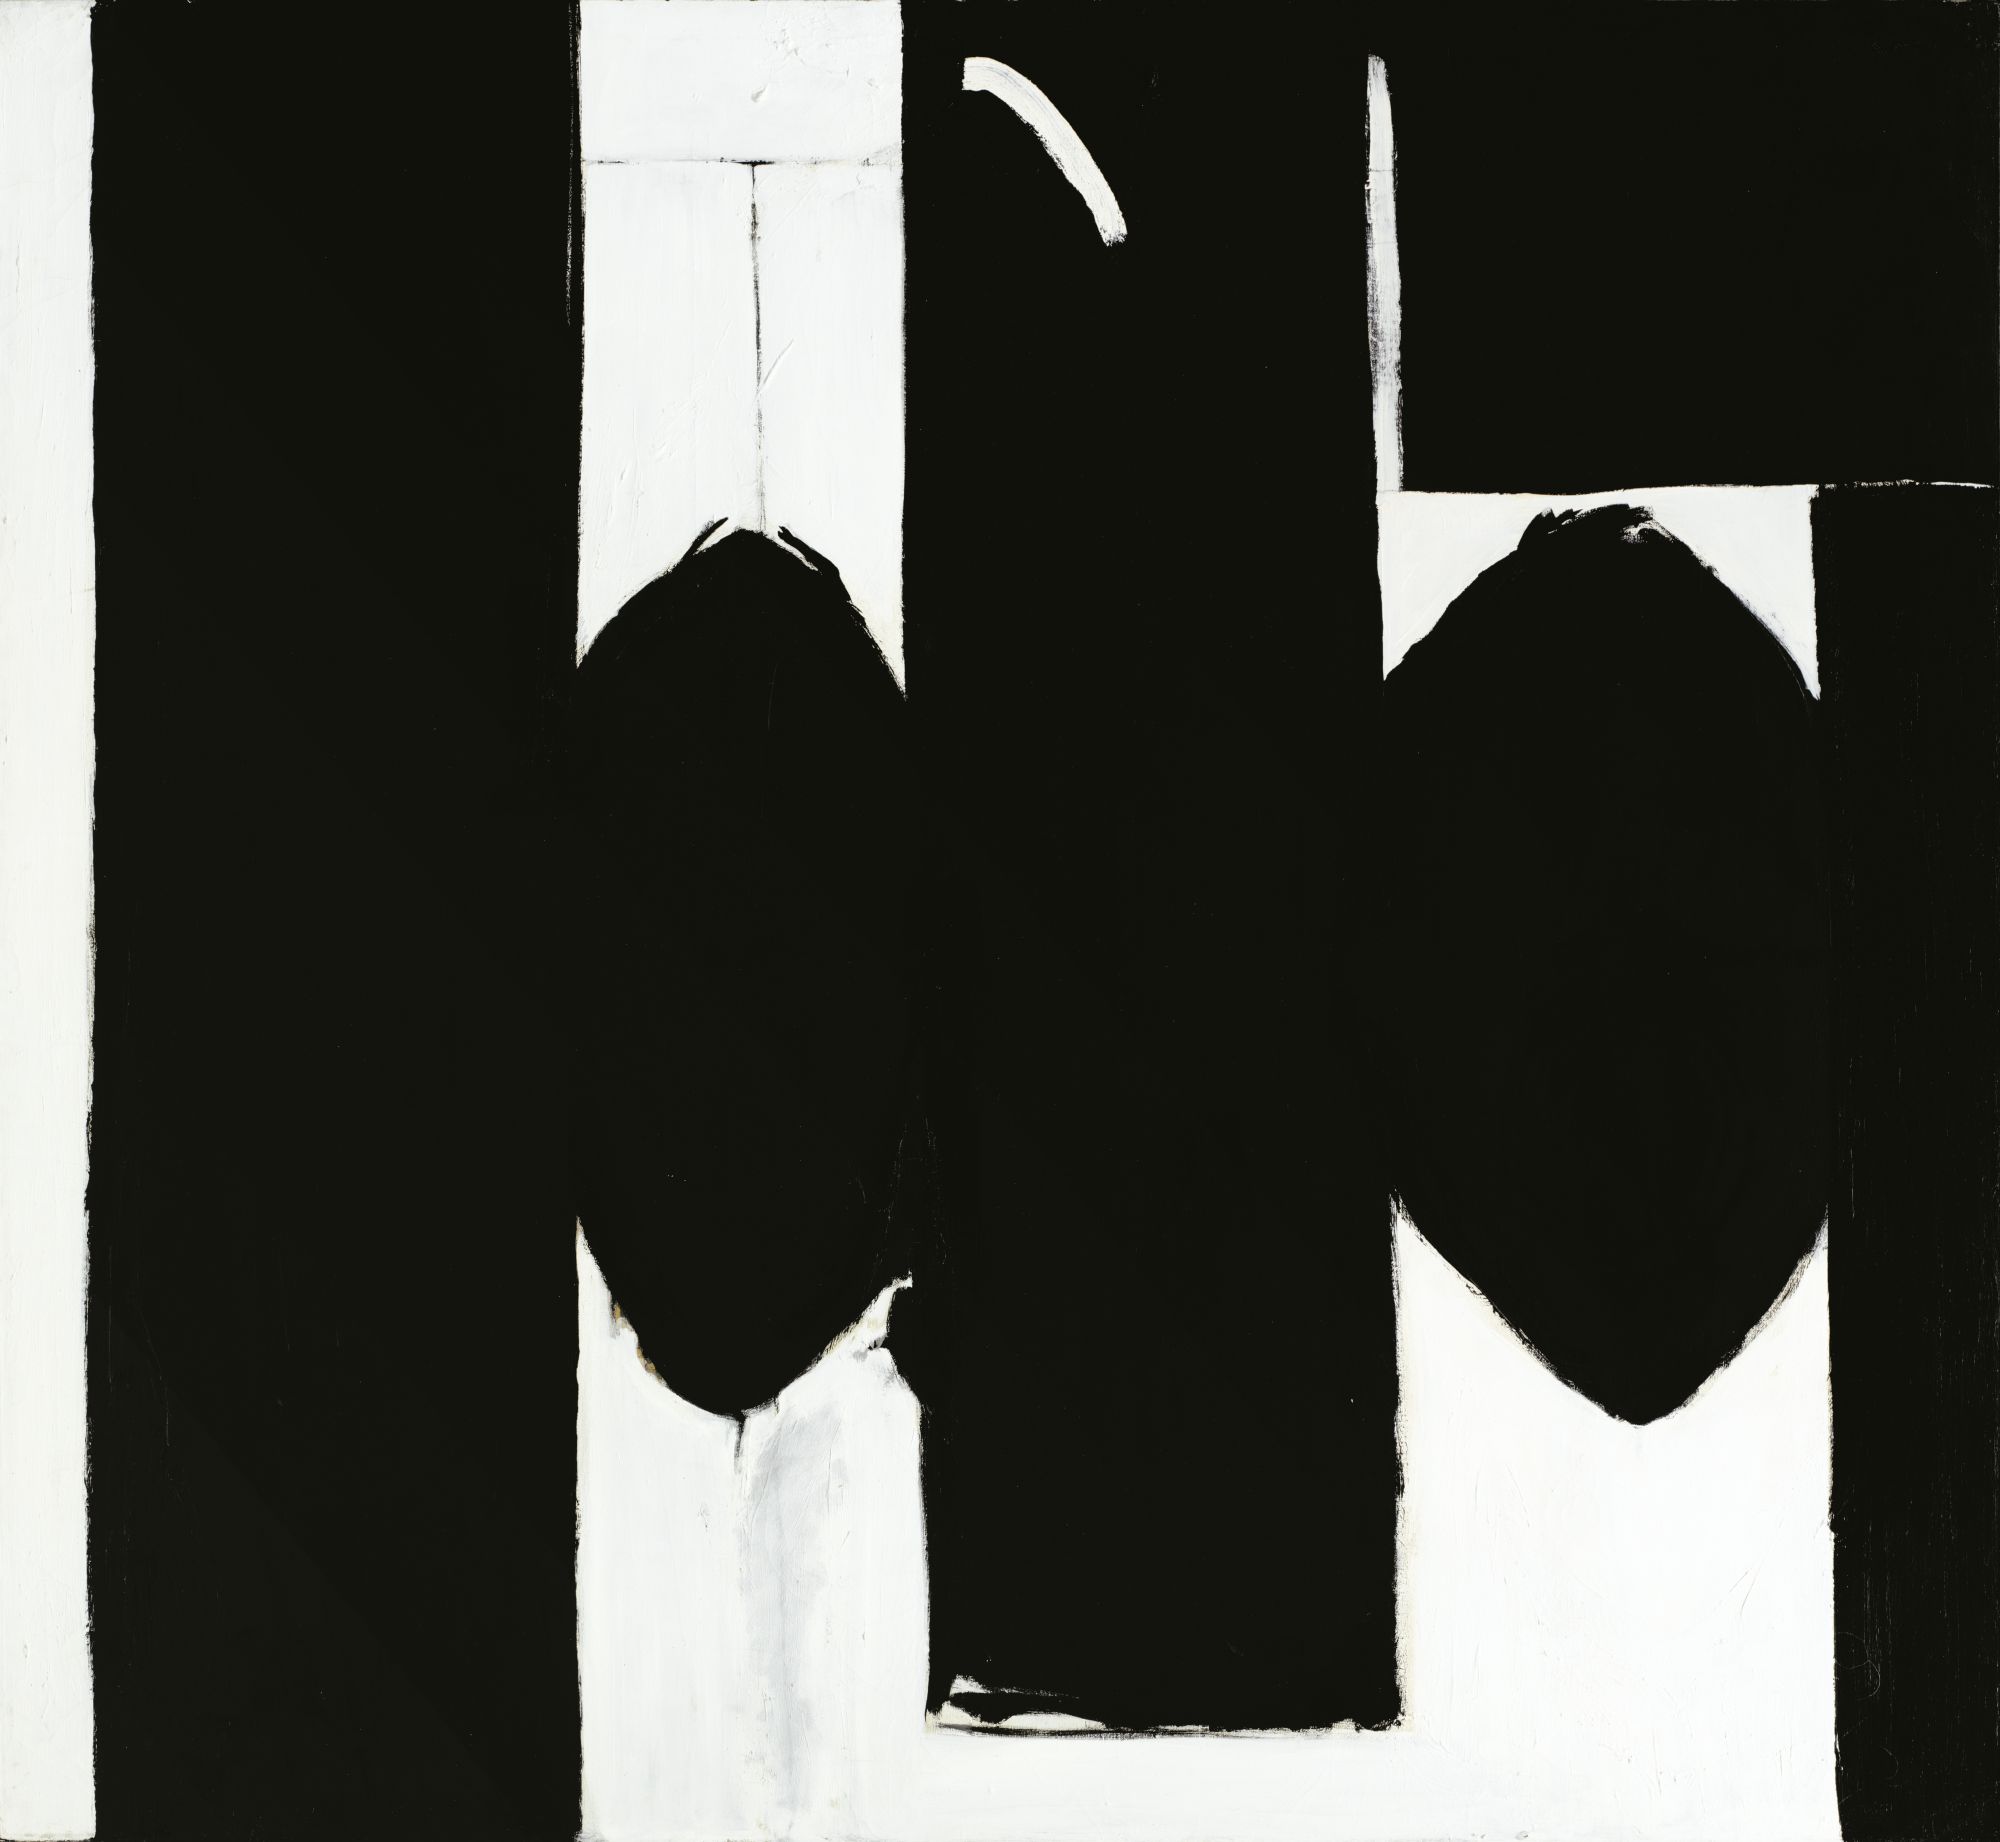 Elegy to the Spanish Republic No. 55, 1961, oil on canvas, 70 ✕ 76 1/8 in. (177.8 ✕ 193.4 cm)